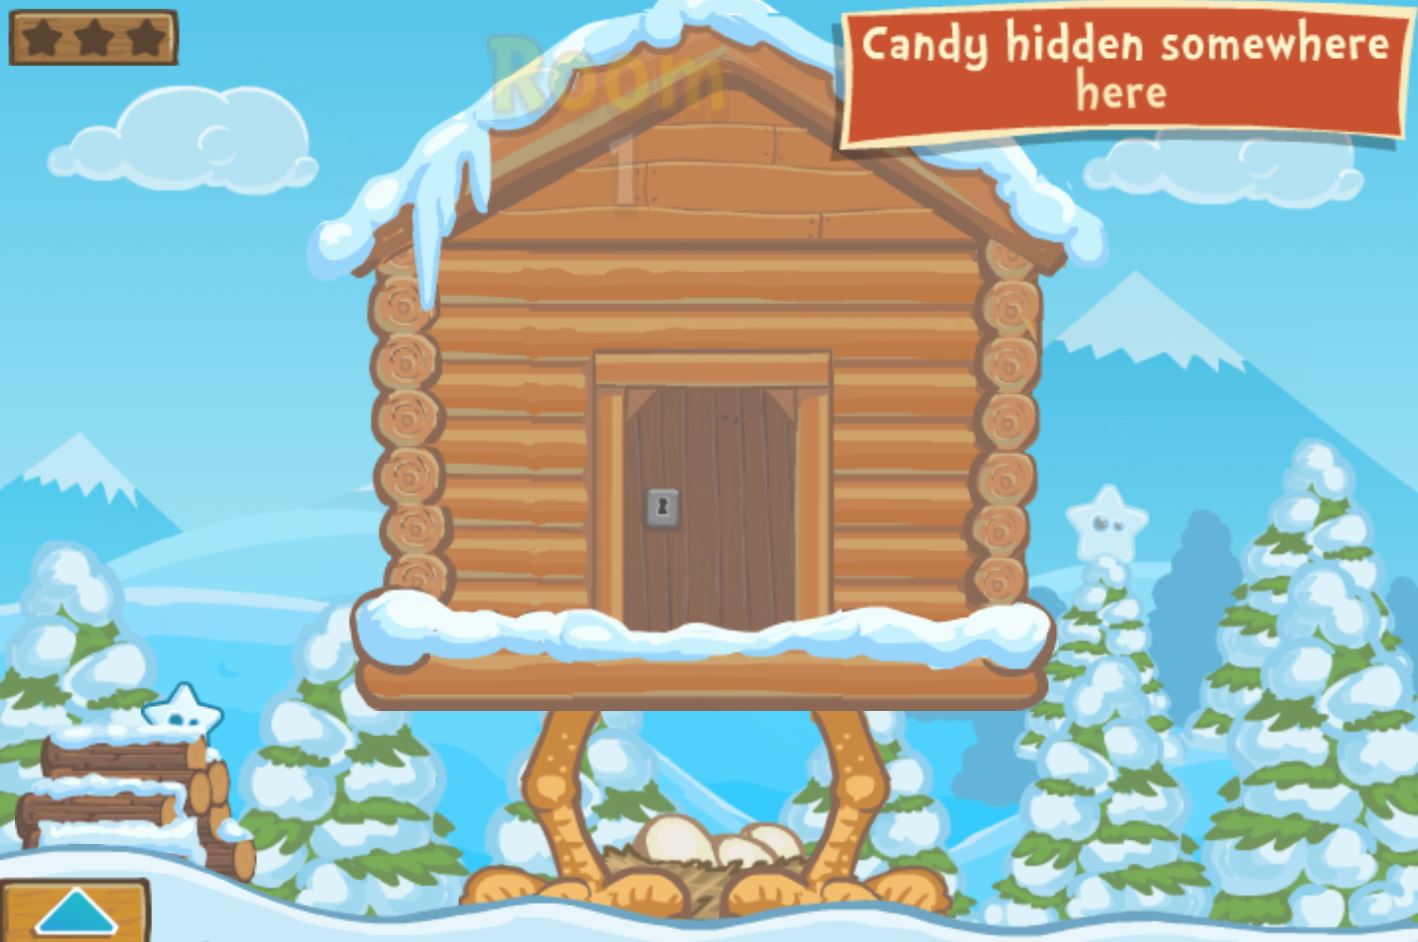 play-game-find-the-candy-2-winter-coolmath-free-online-arcade-games